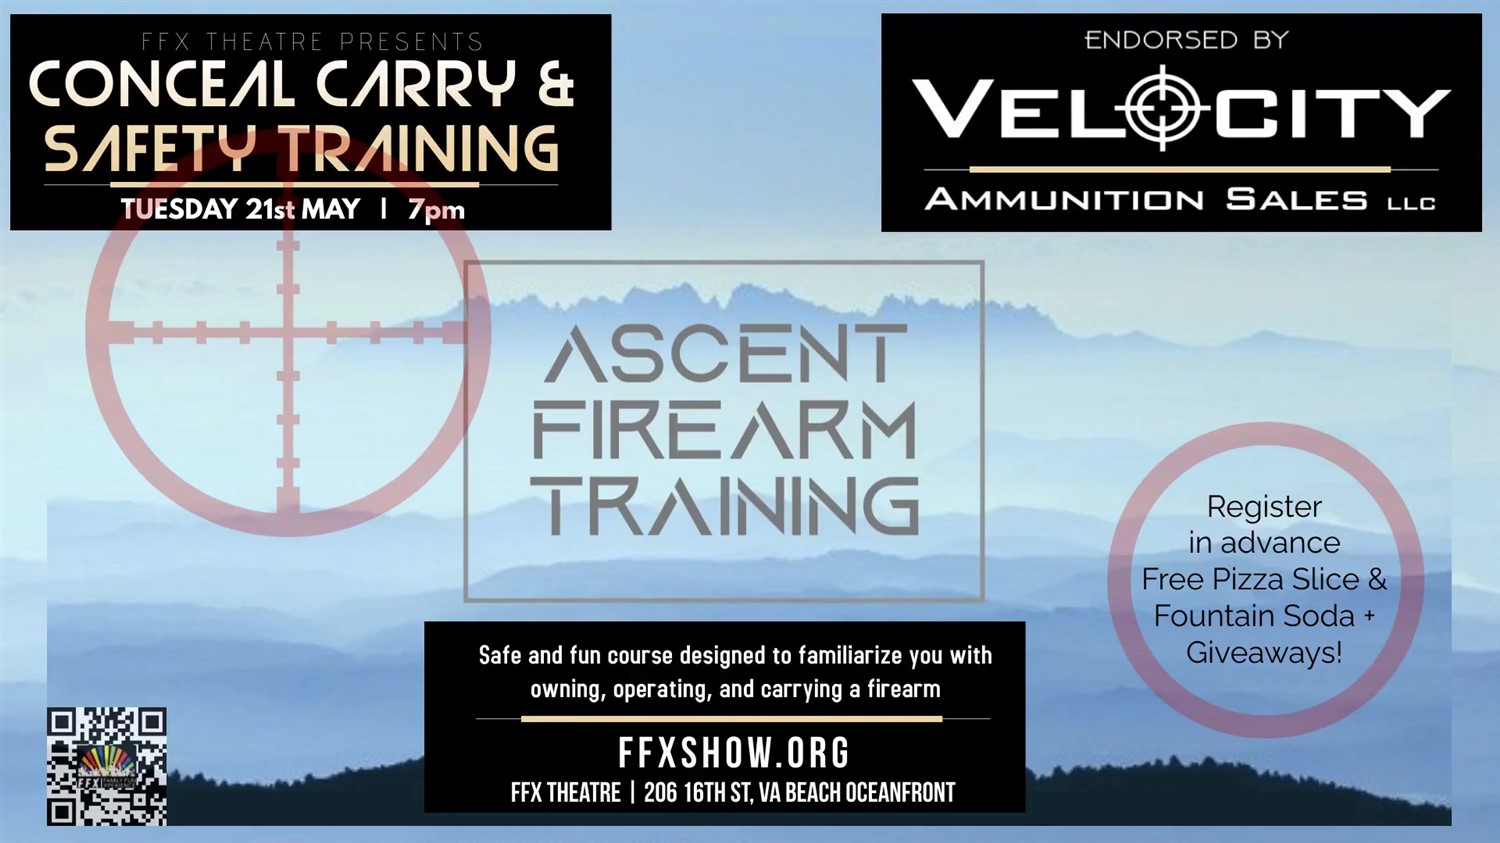 ASCENT FIREARM TRAINING Conceal Carry and/or Safety Class on may. 21, 19:00@FFX Theatre - Compra entradas y obtén información enFamily Fun Xperience tickets.ffxshow.org